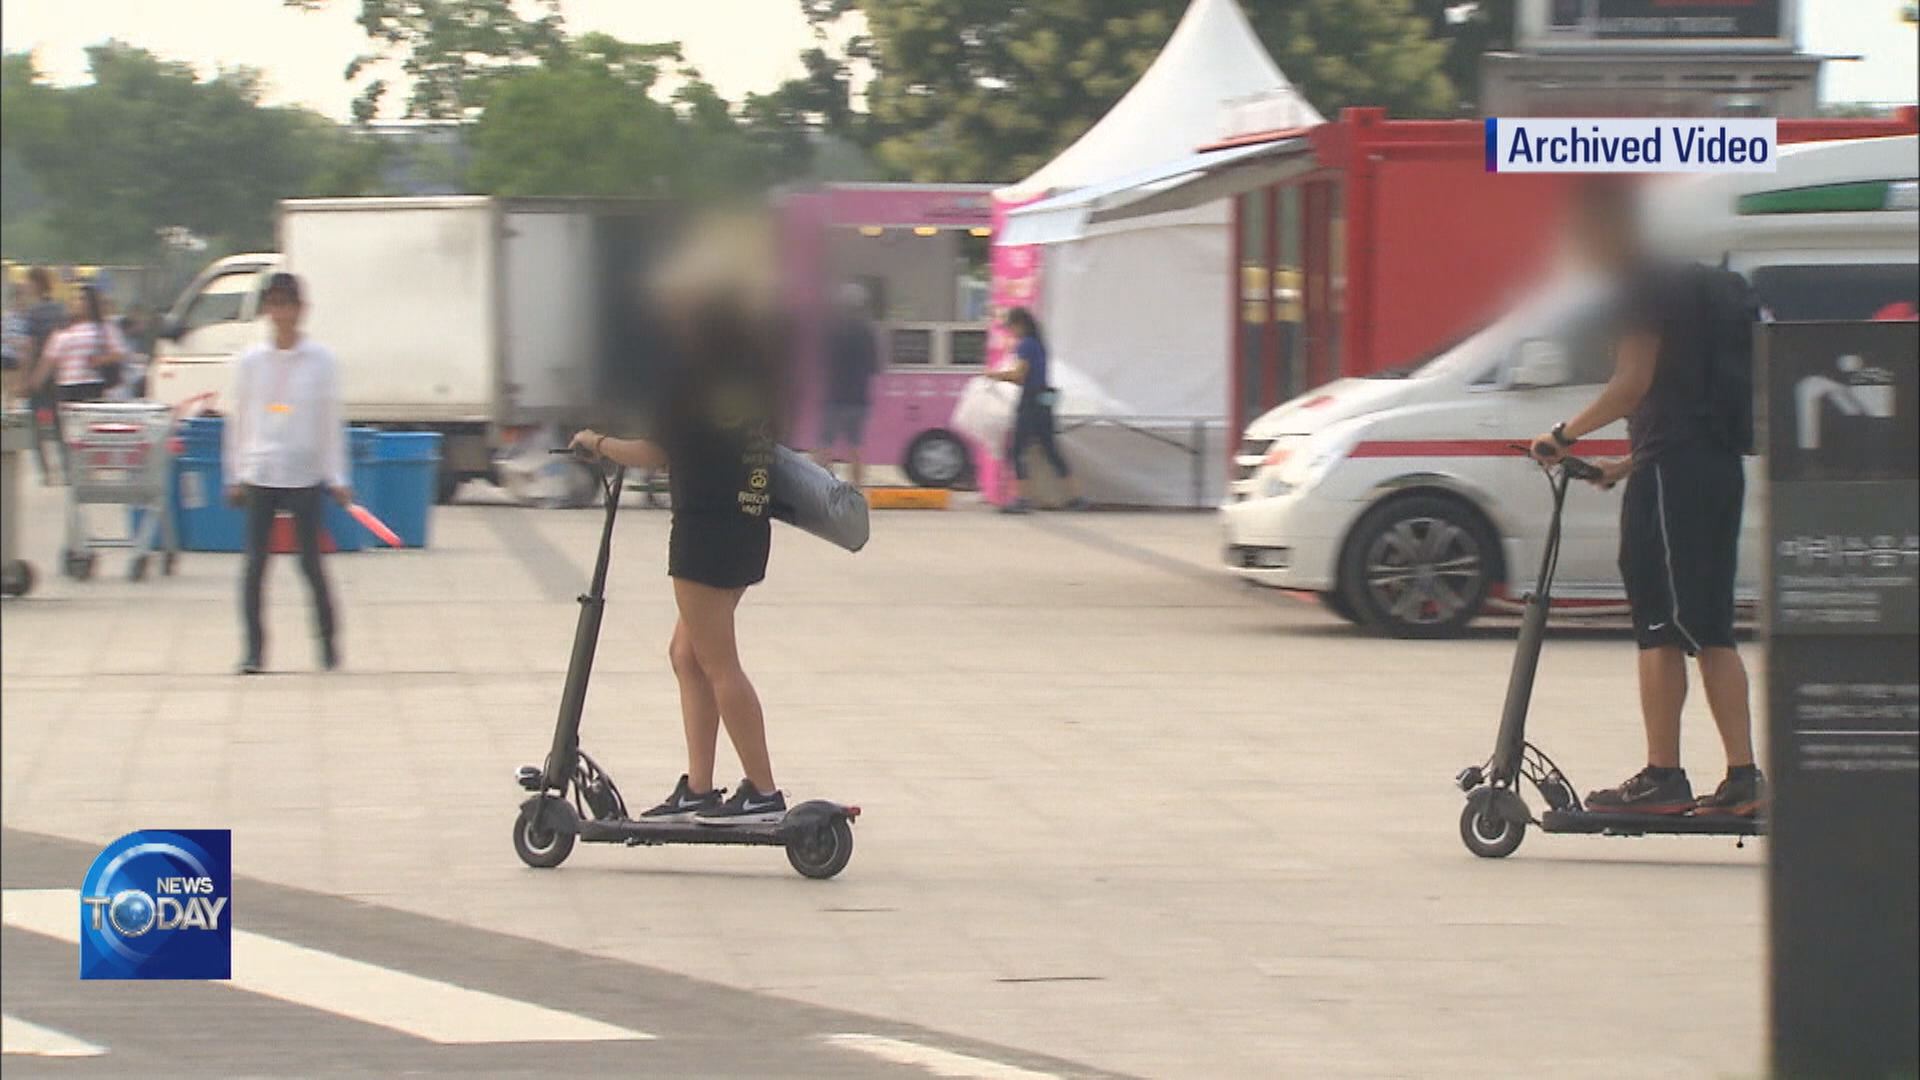 TOUGHENED REGULATIONS ON E-SCOOTERS